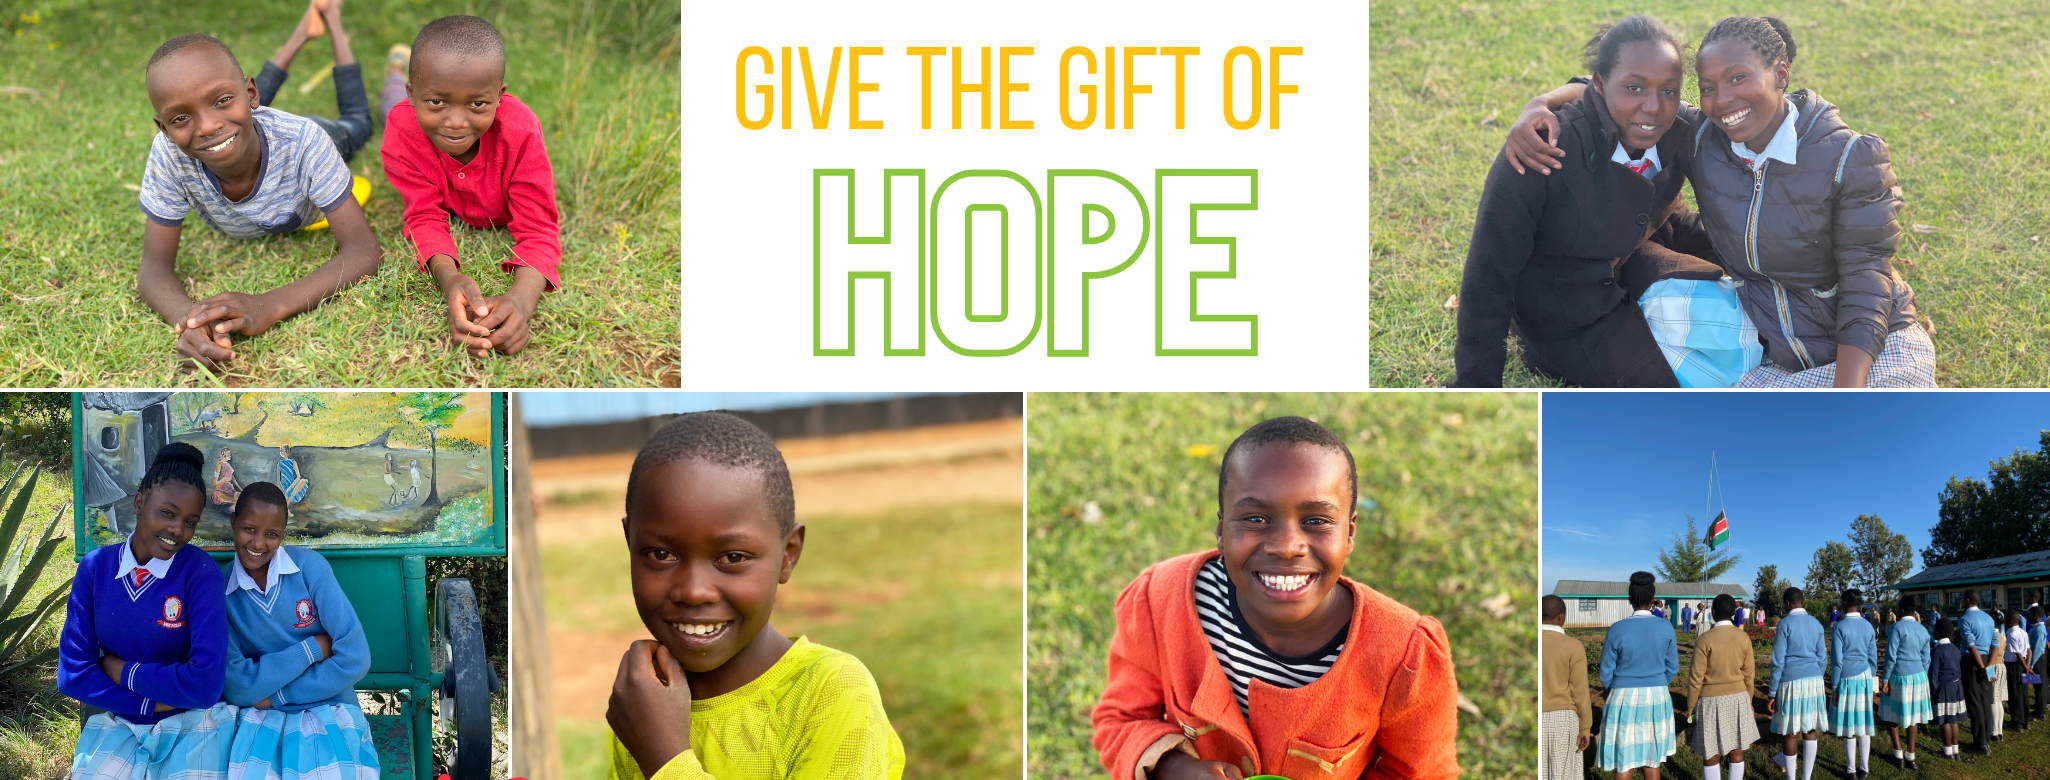 give the gift of hope